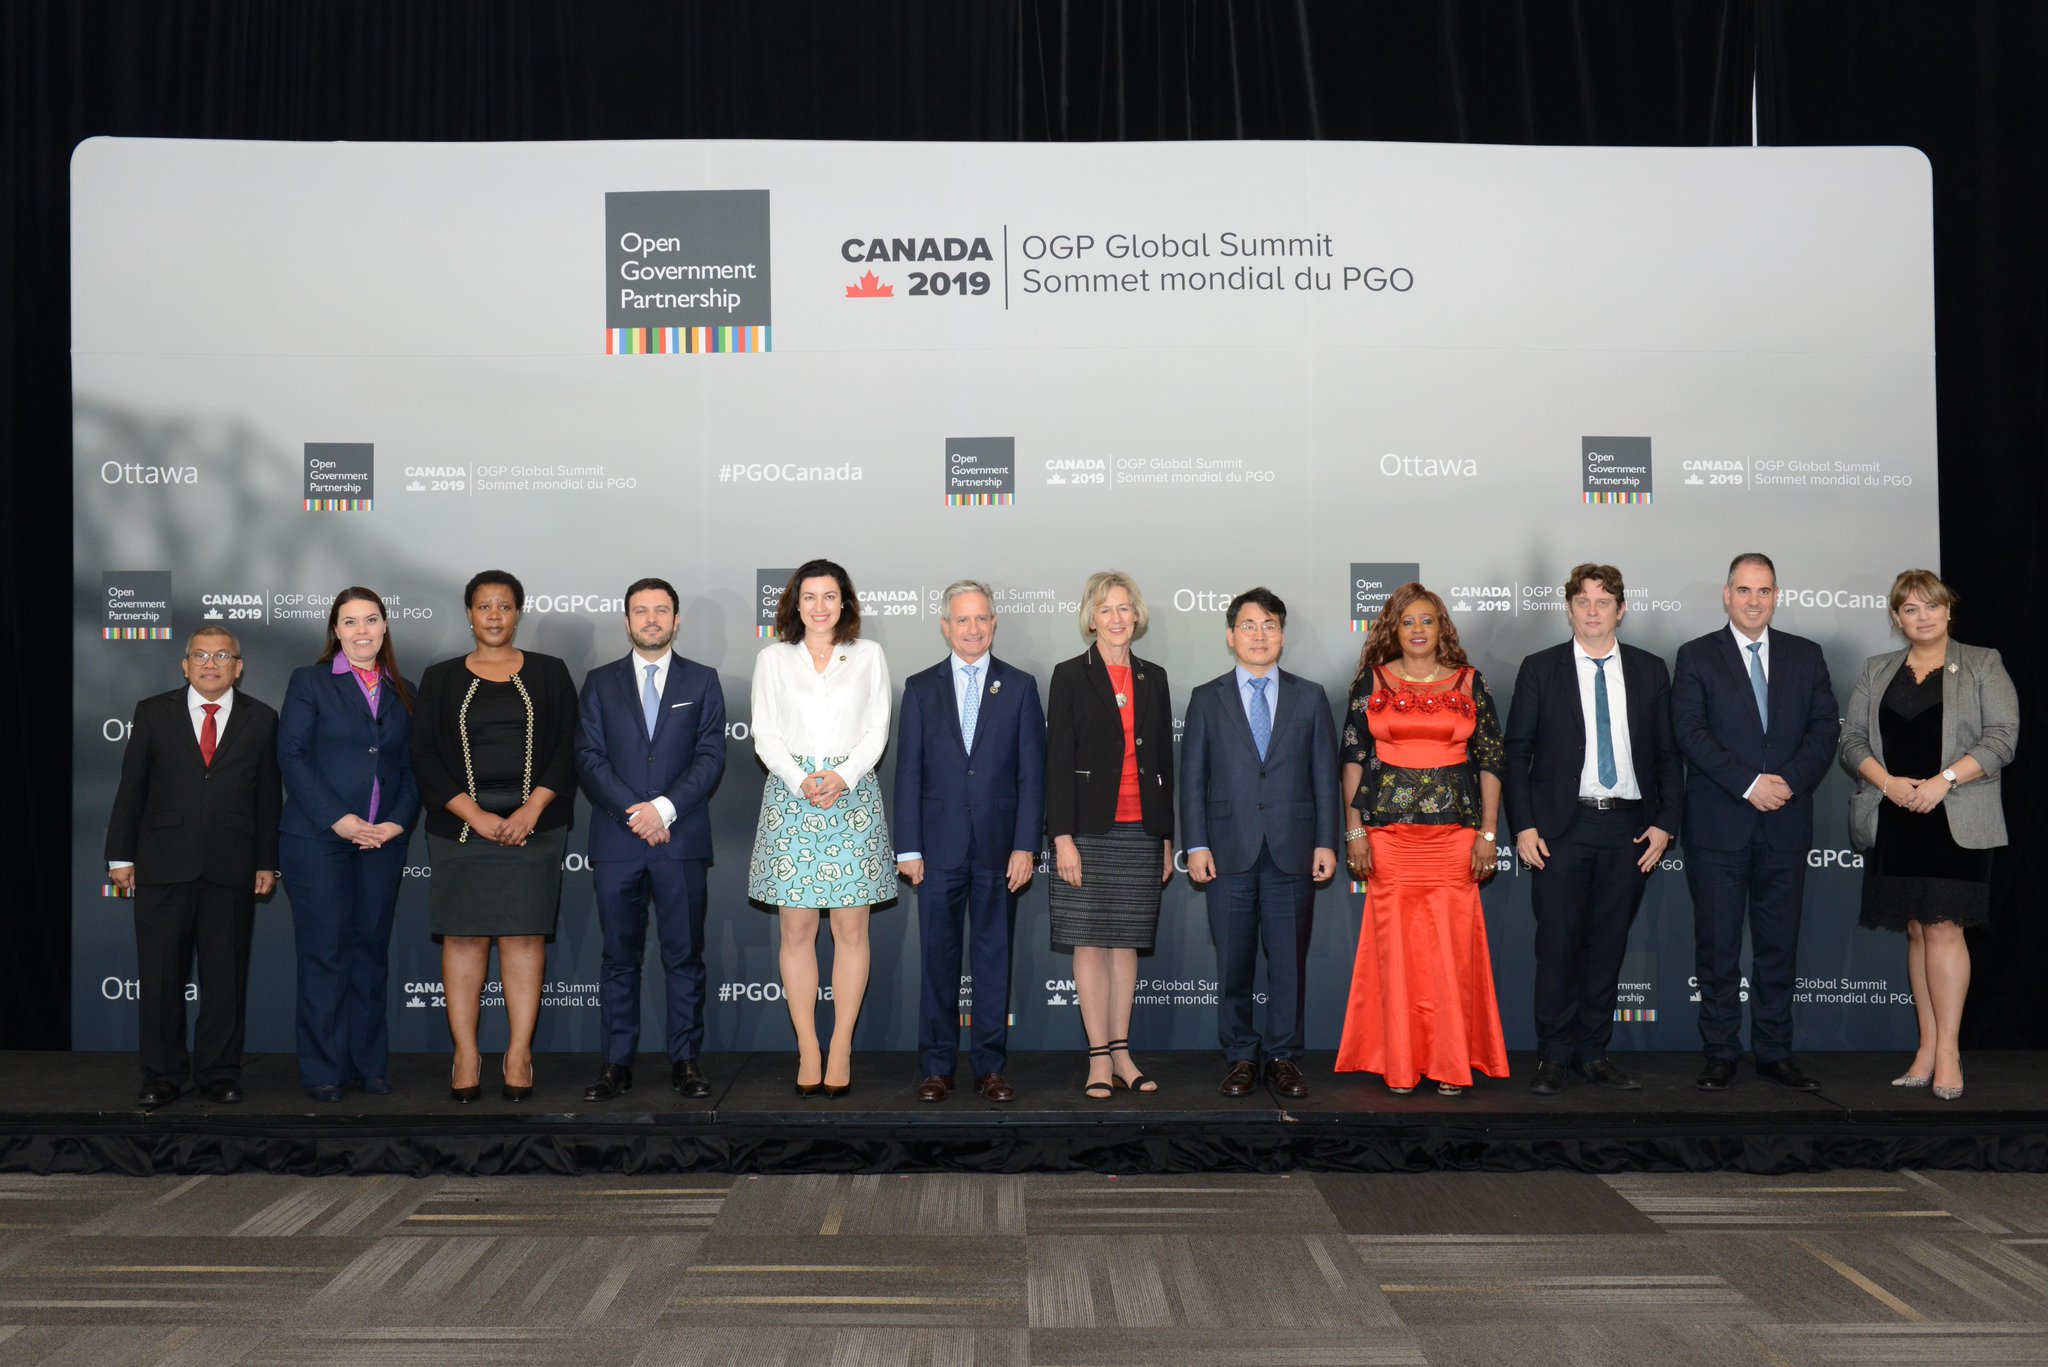 Government representatives posing for a group picture at the OGP Global Summit 2019 in Ottawa